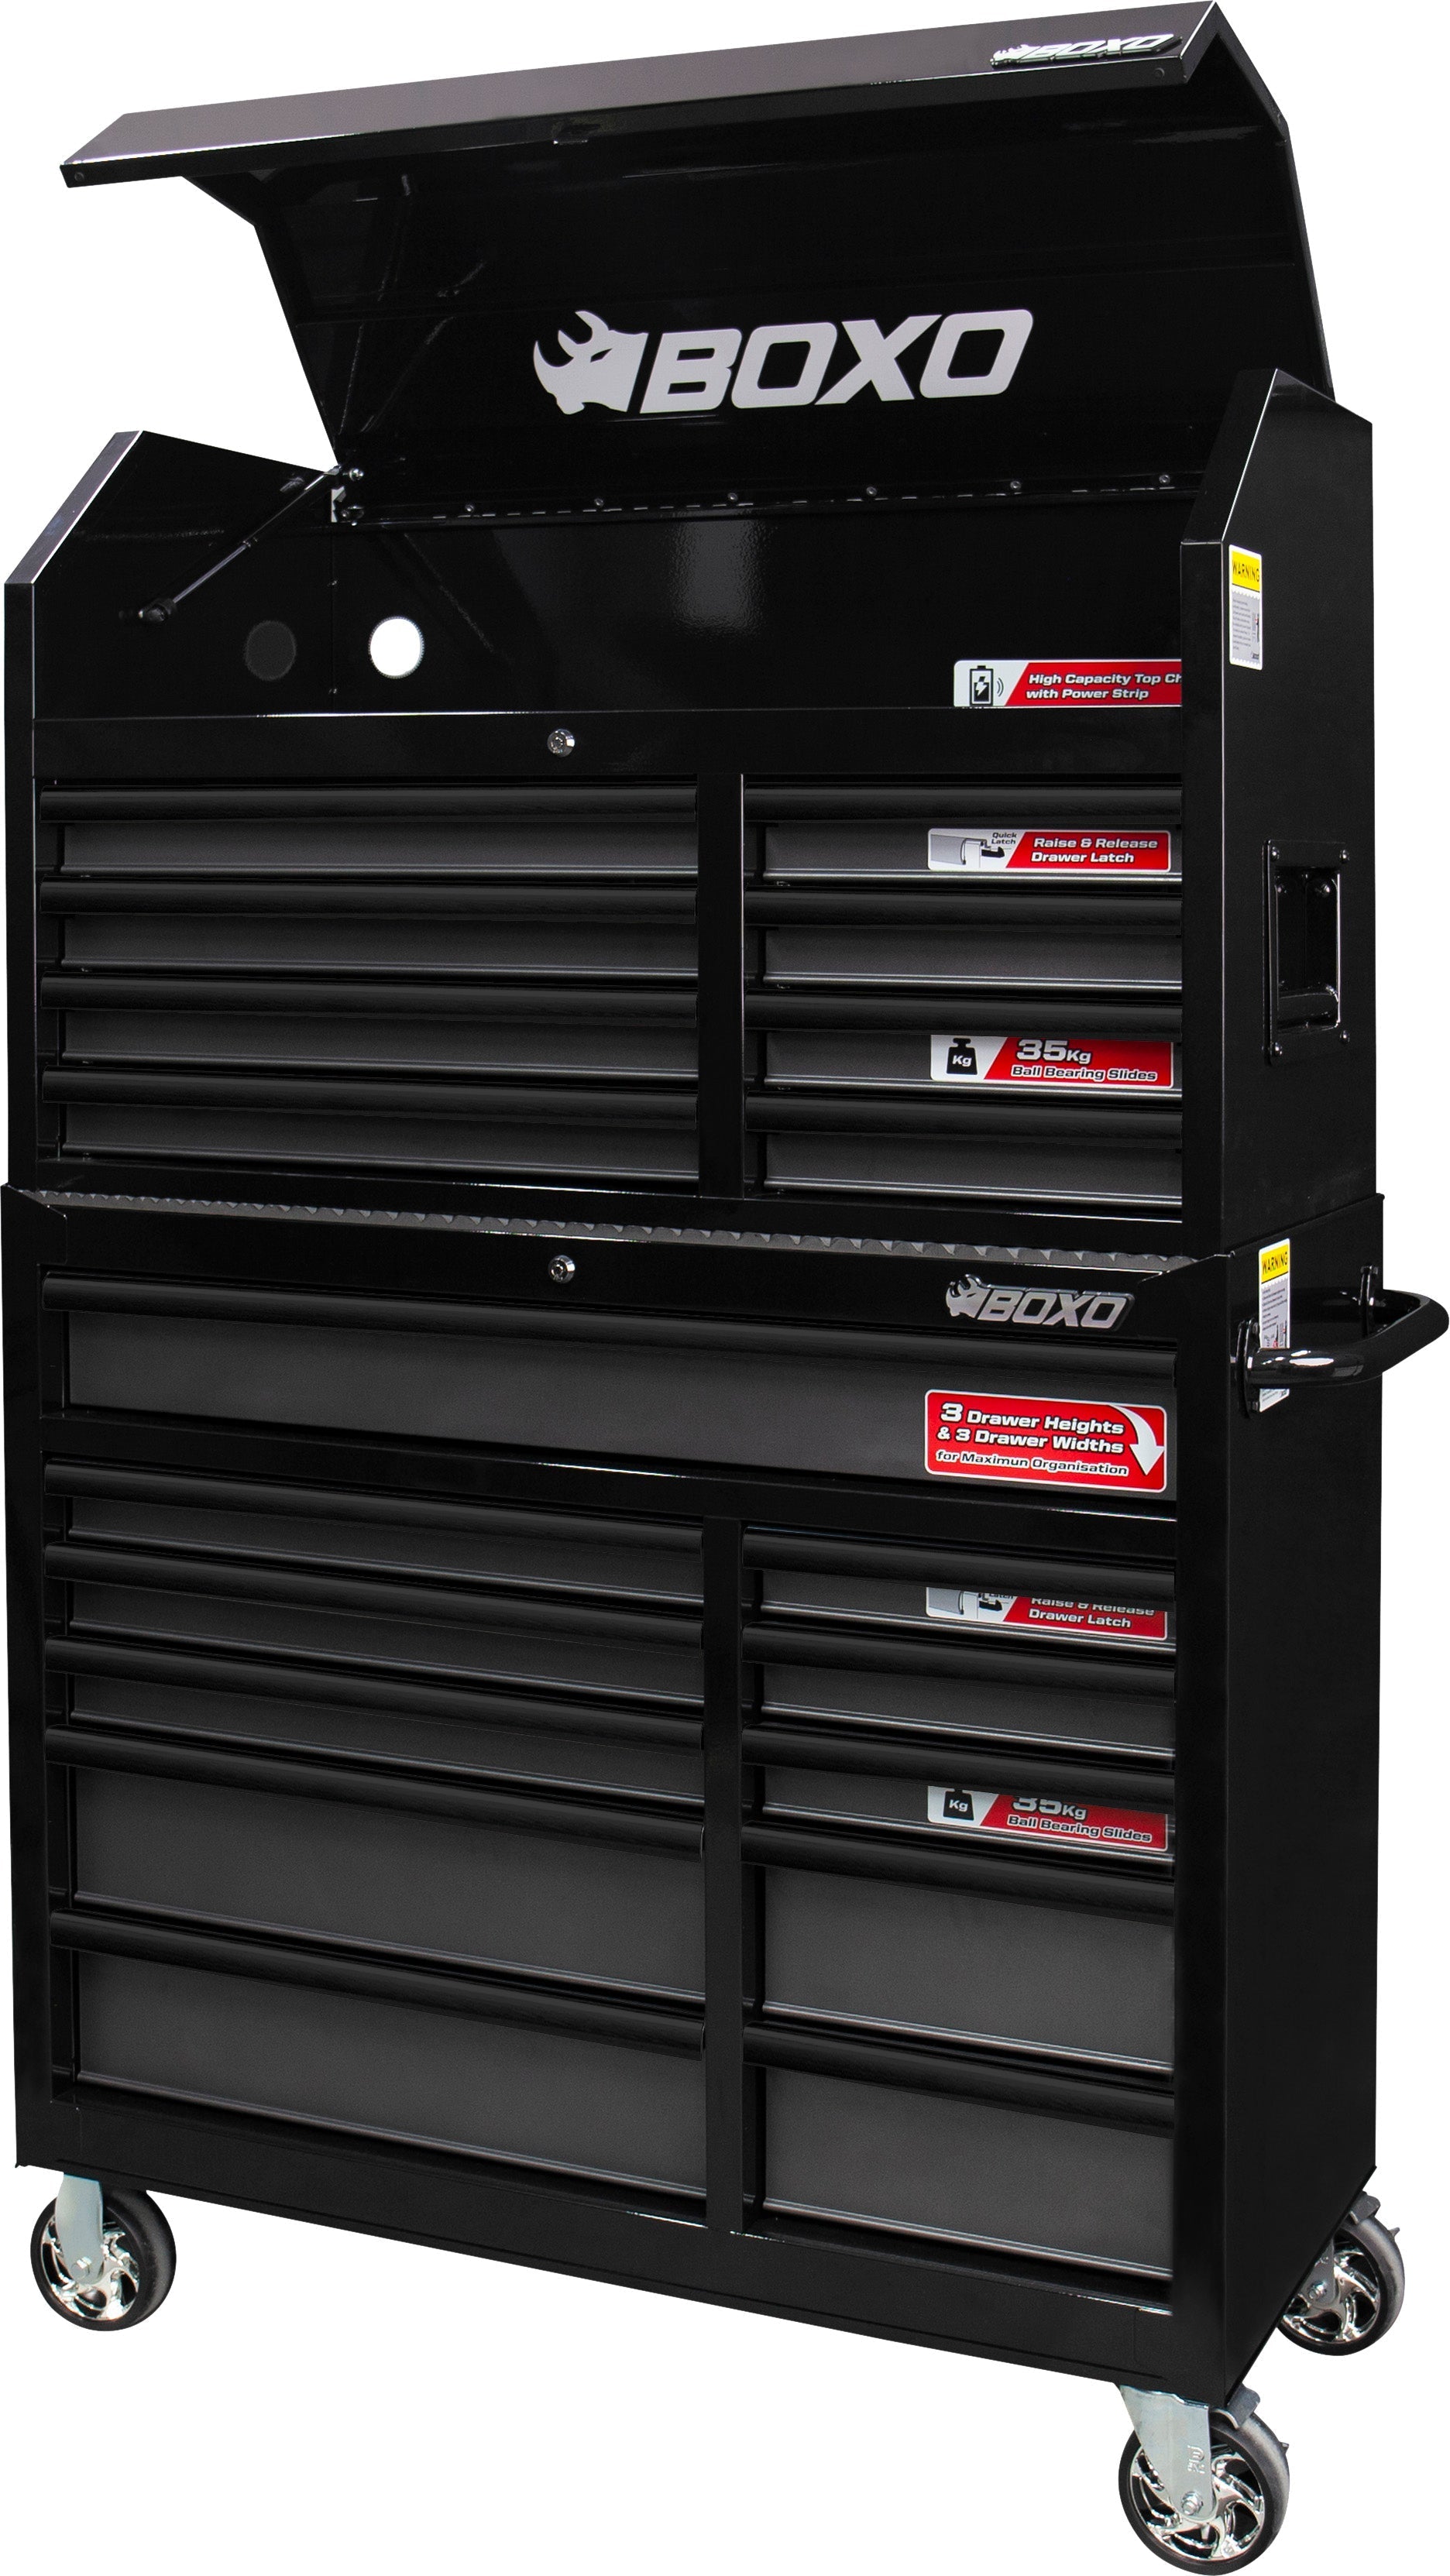 BOXO 41" 19 Drawer Toolbox Stack with Drawer Trim Pack - Black Body & Trim Colour Options